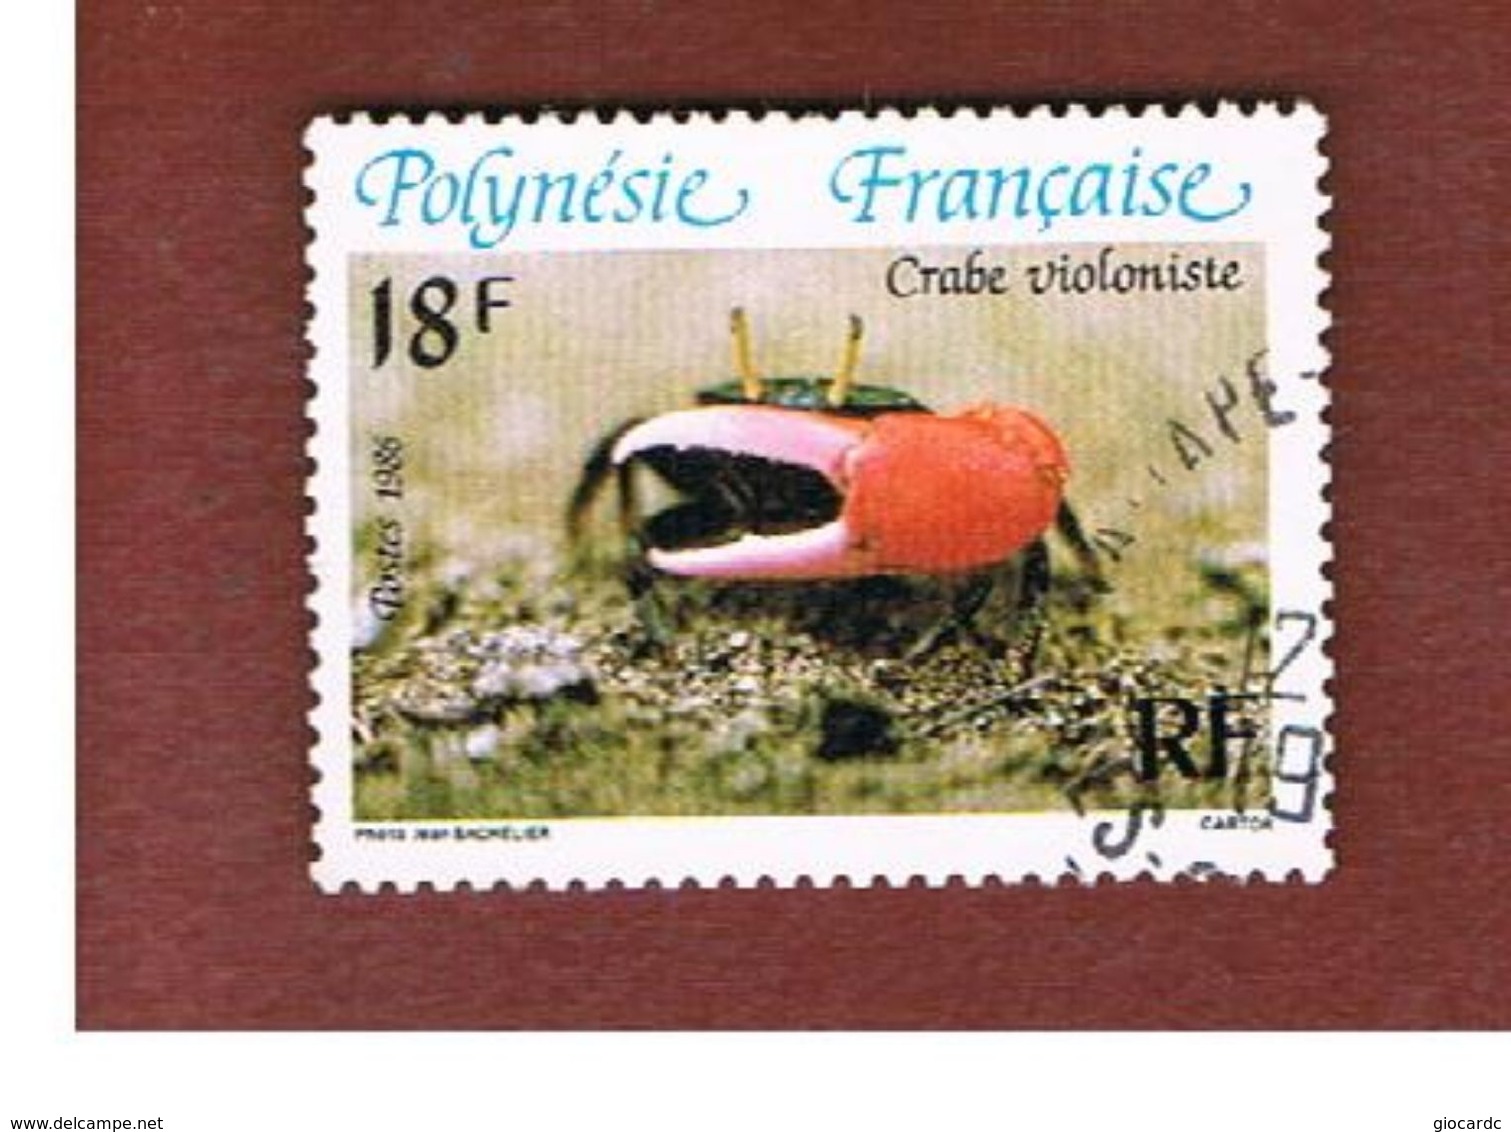 POLINESIA FRANCESE  (FRENCH POLYNESIA ) - SG 465  - 1986 CRABS: FIDDLER - USED° - Oblitérés